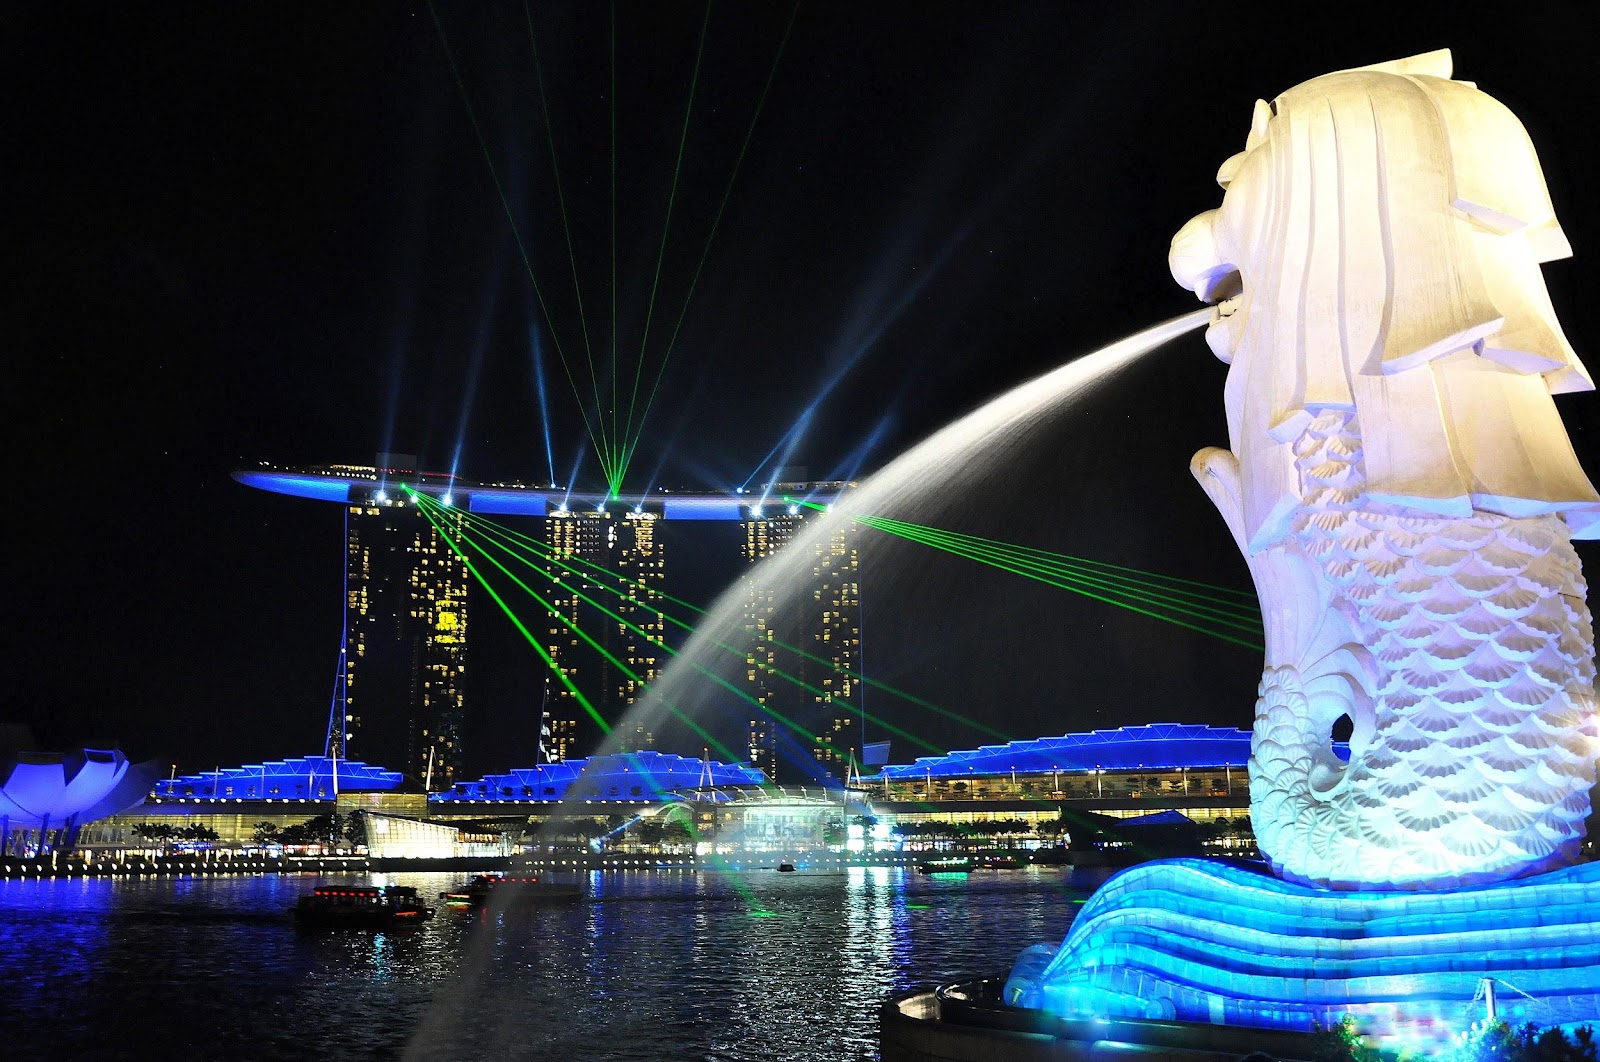 marina bay sands hotel illuminated by green and blue laser beams and white merlion statue in the foreground seen at night in singapore